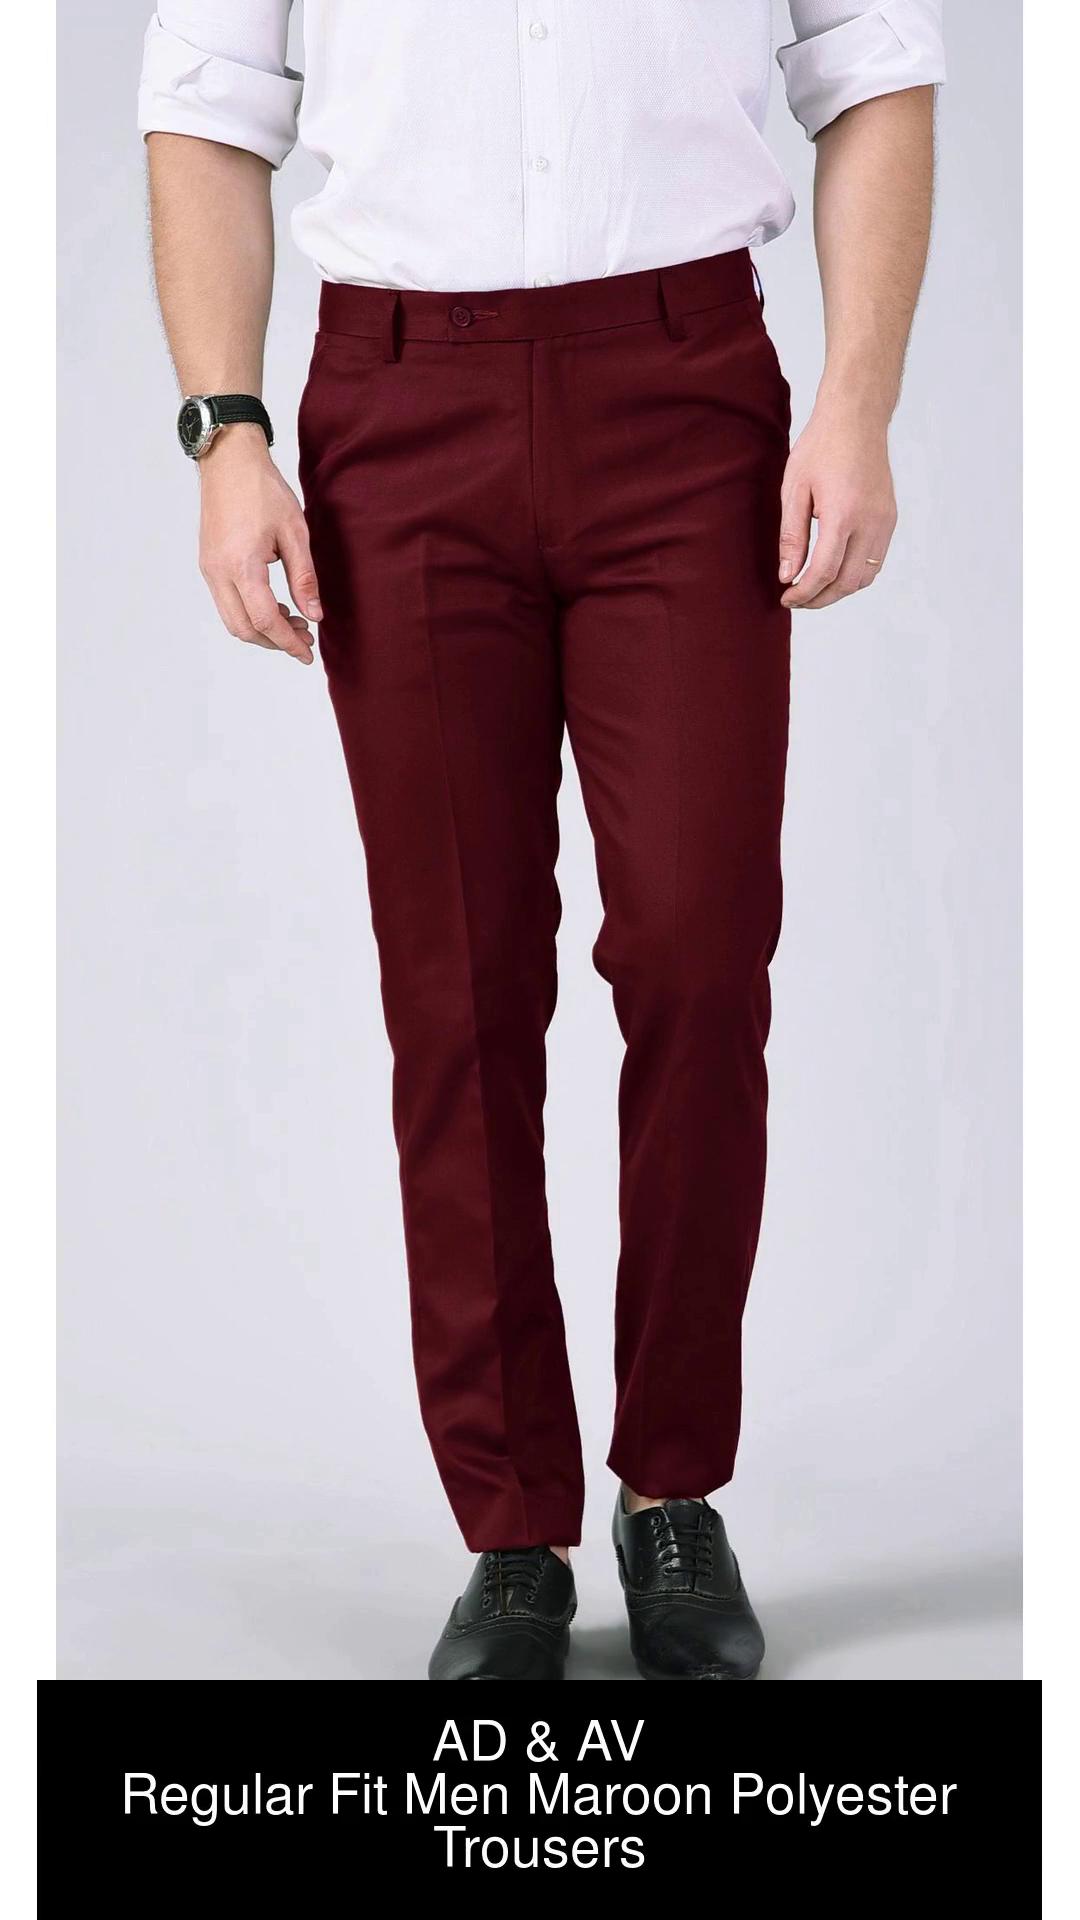 Buy Hancock Mens Maroon Cotton Solid Slim Fit Formal Trouser at Amazon.in